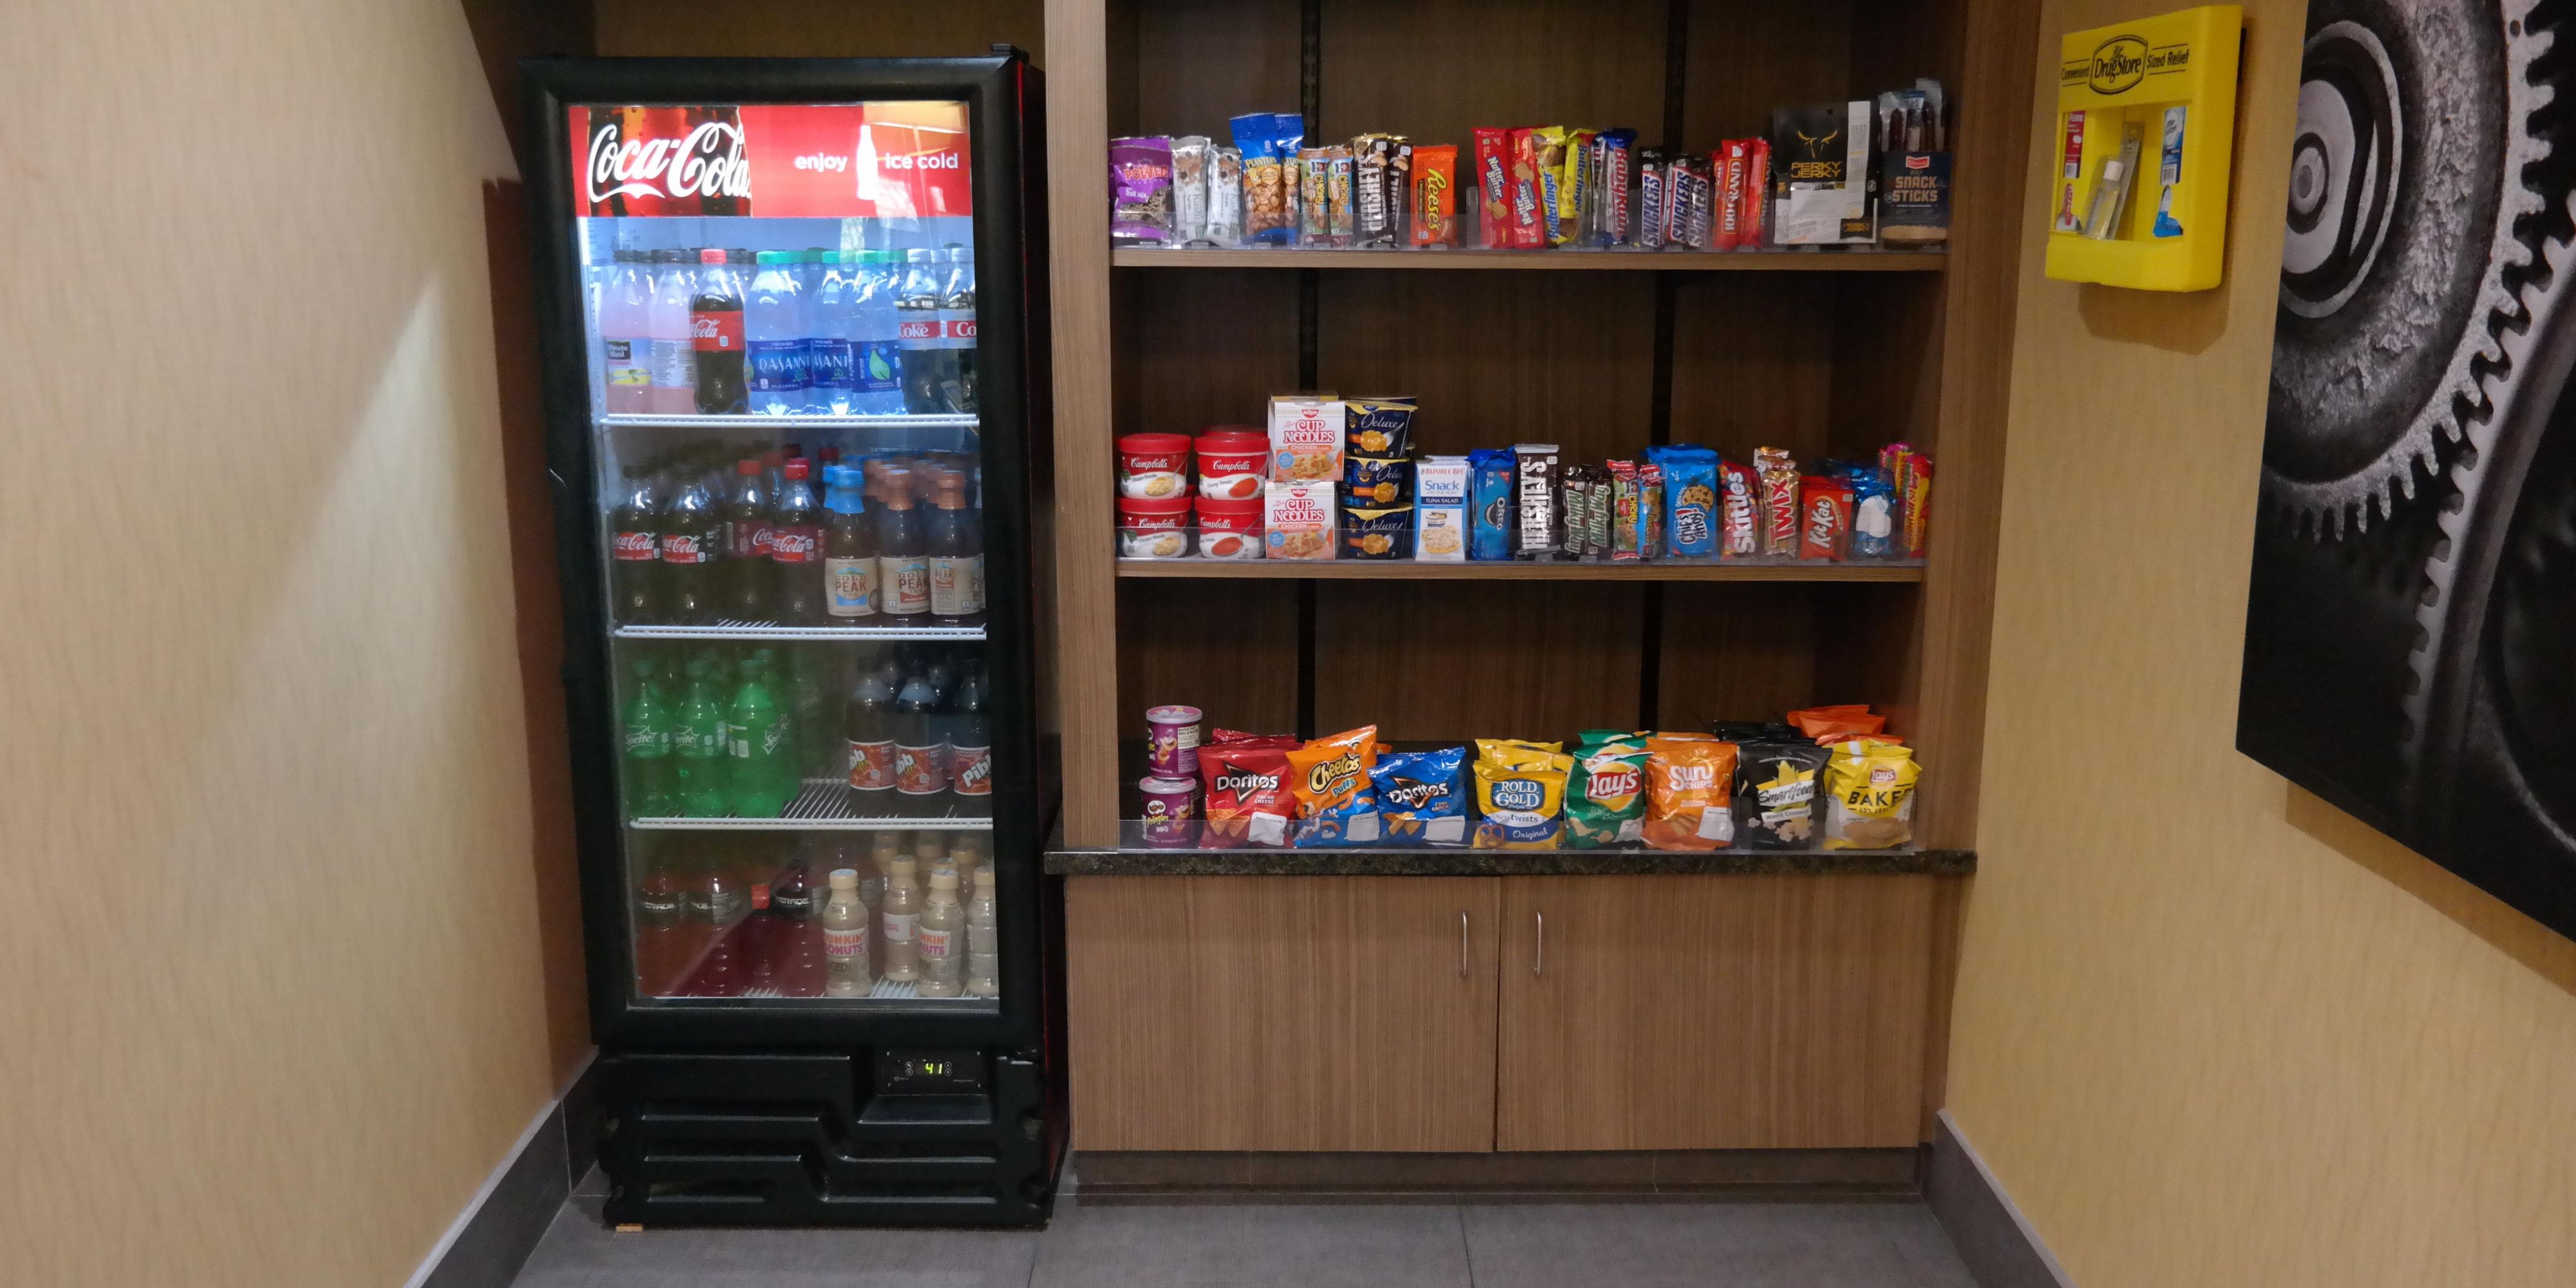 Forget something? Need a late night snack or drink? Our Marketplace has you covered with a wide variety of snacks, drinks, and toiletry items.